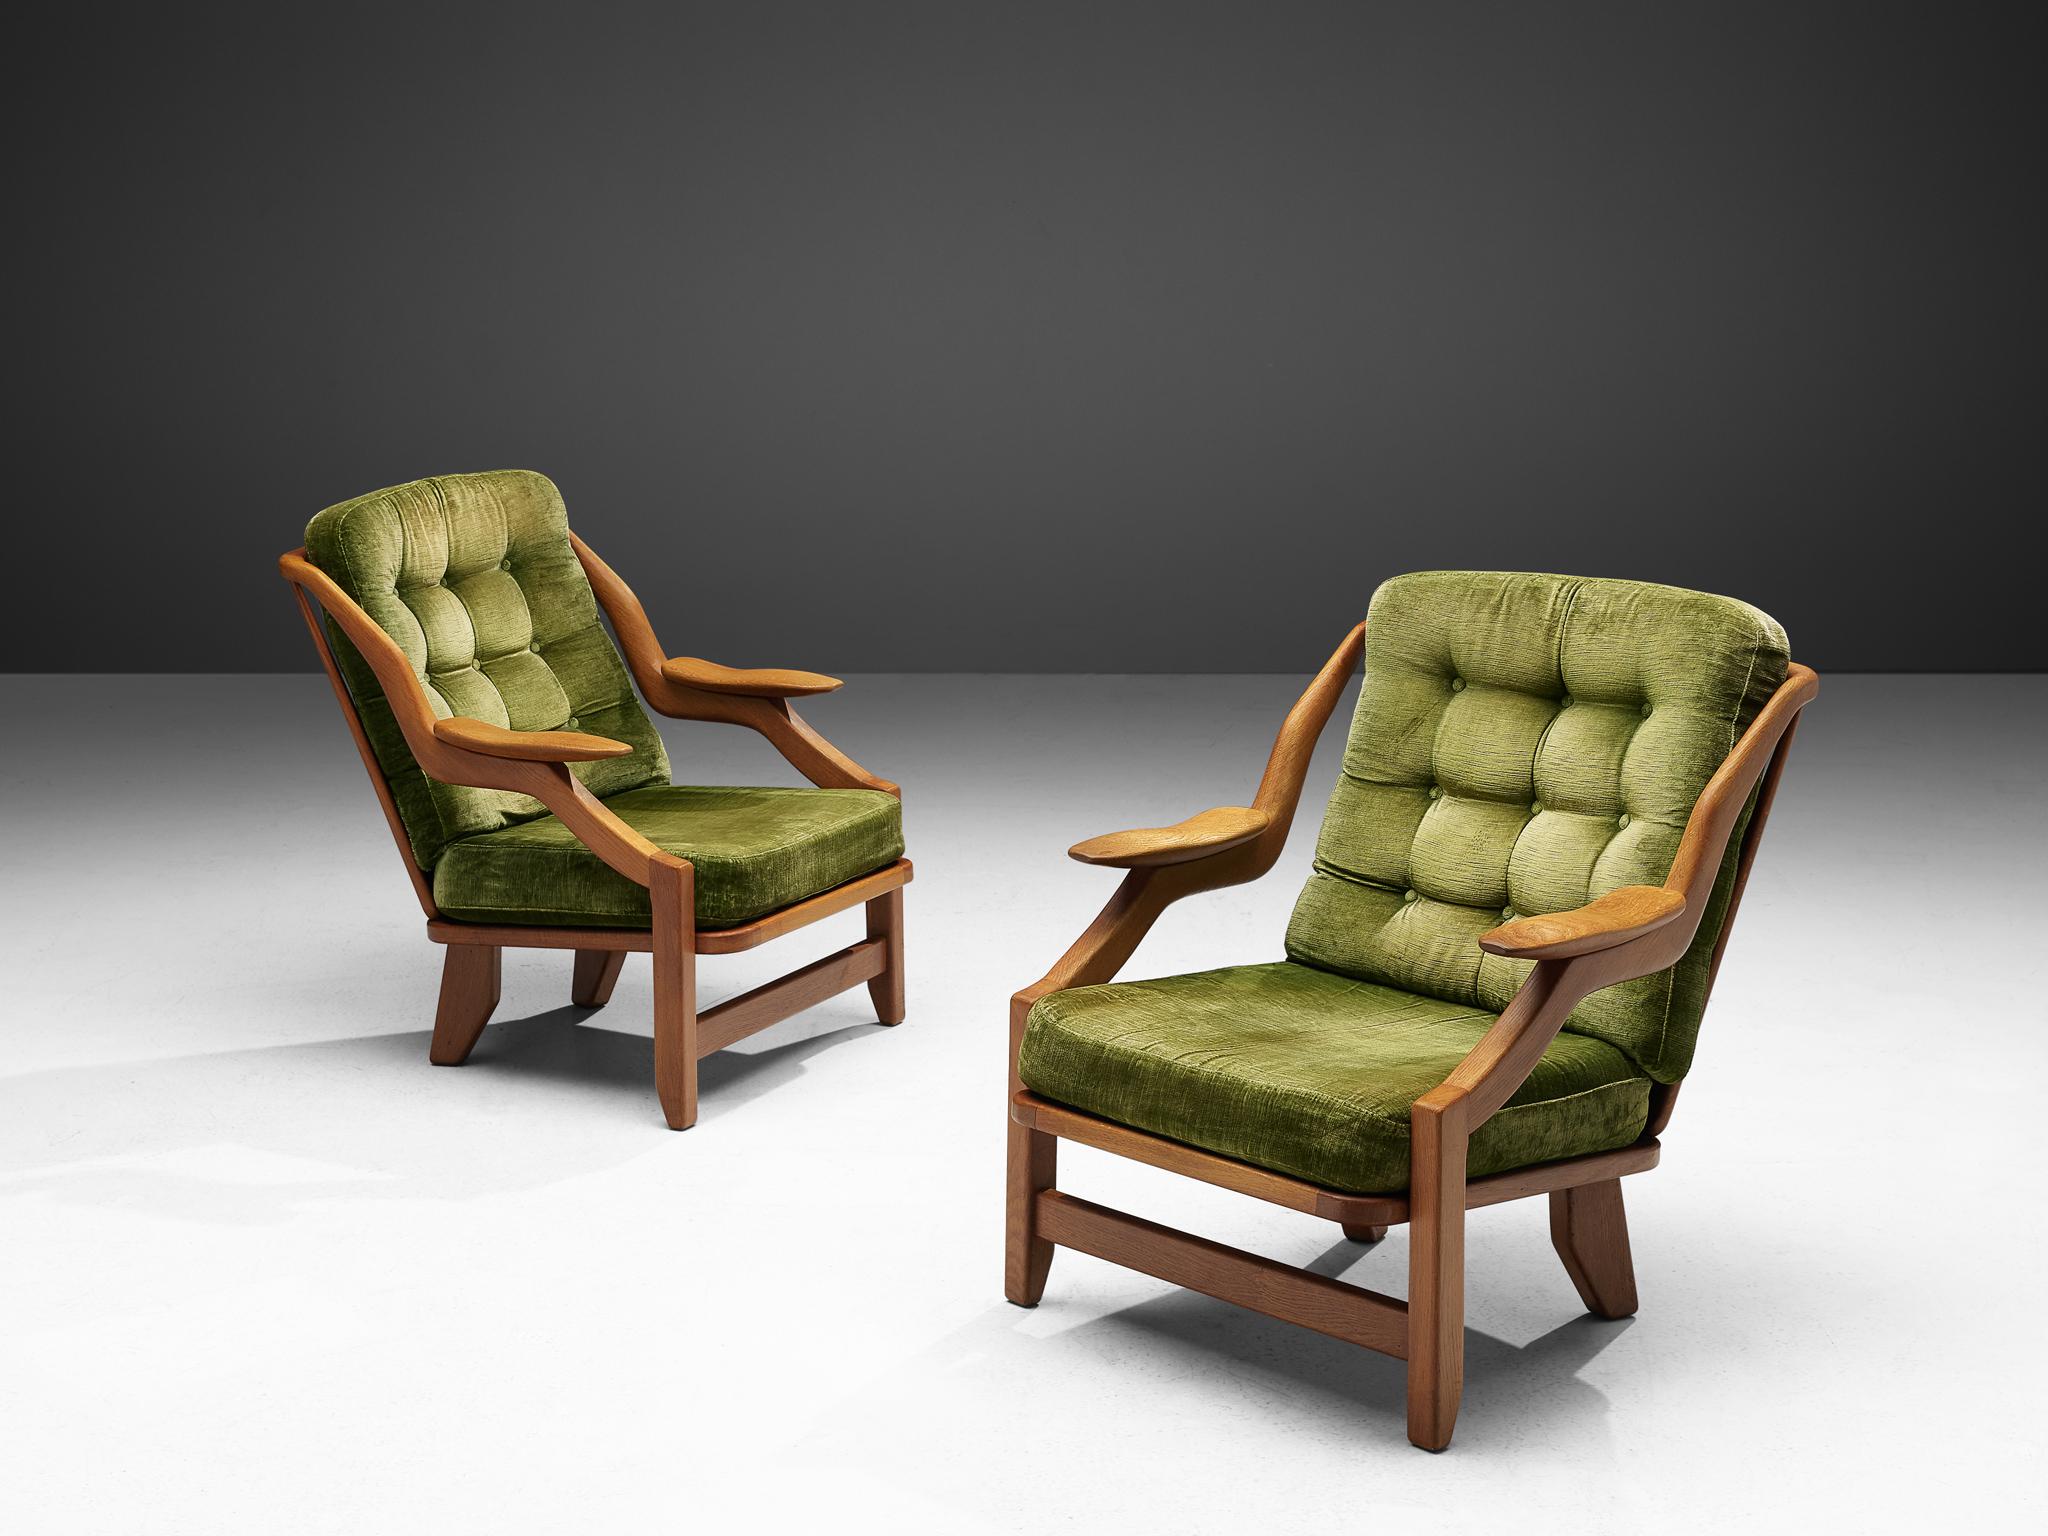 Guillerme & Chambron, set of lounge chairs in green velvet upholstery and oak, France 1950s.

This French designer duo is known for their extreme high quality solid oak furniture, from which this set is another great example. These chairs have a